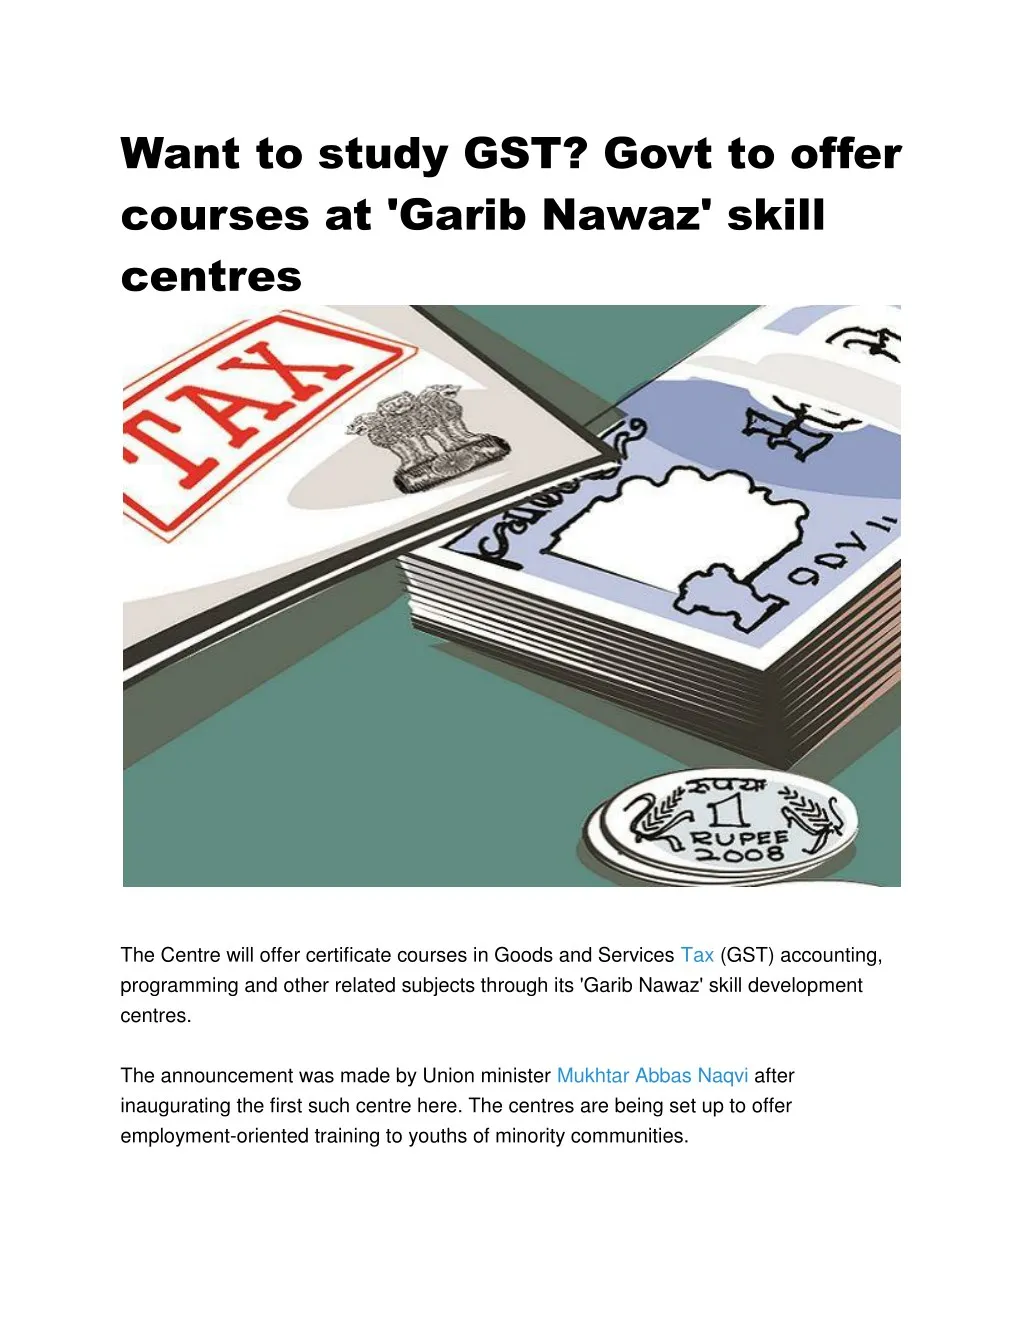 want to study gst govt to offer courses at garib